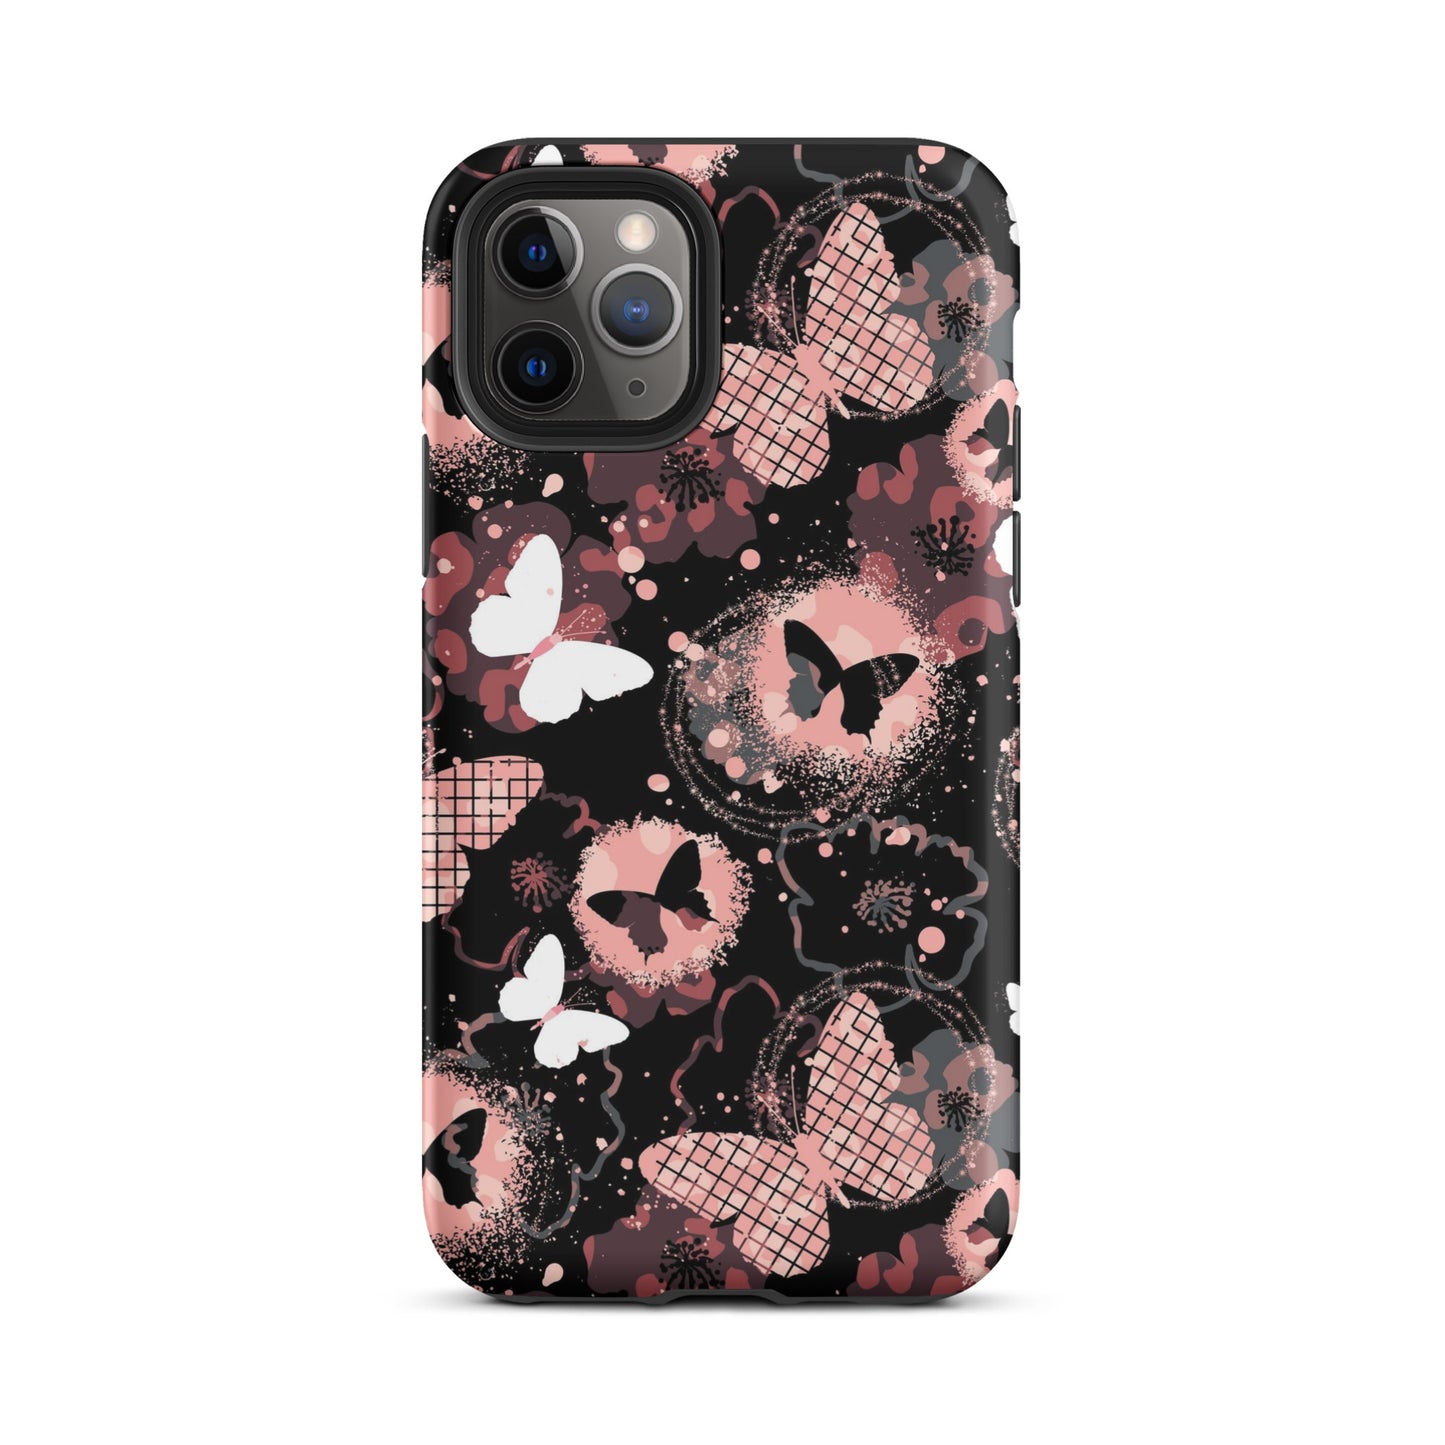 Butterfly Energy iPhone Case Matte iPhone 11 Pro